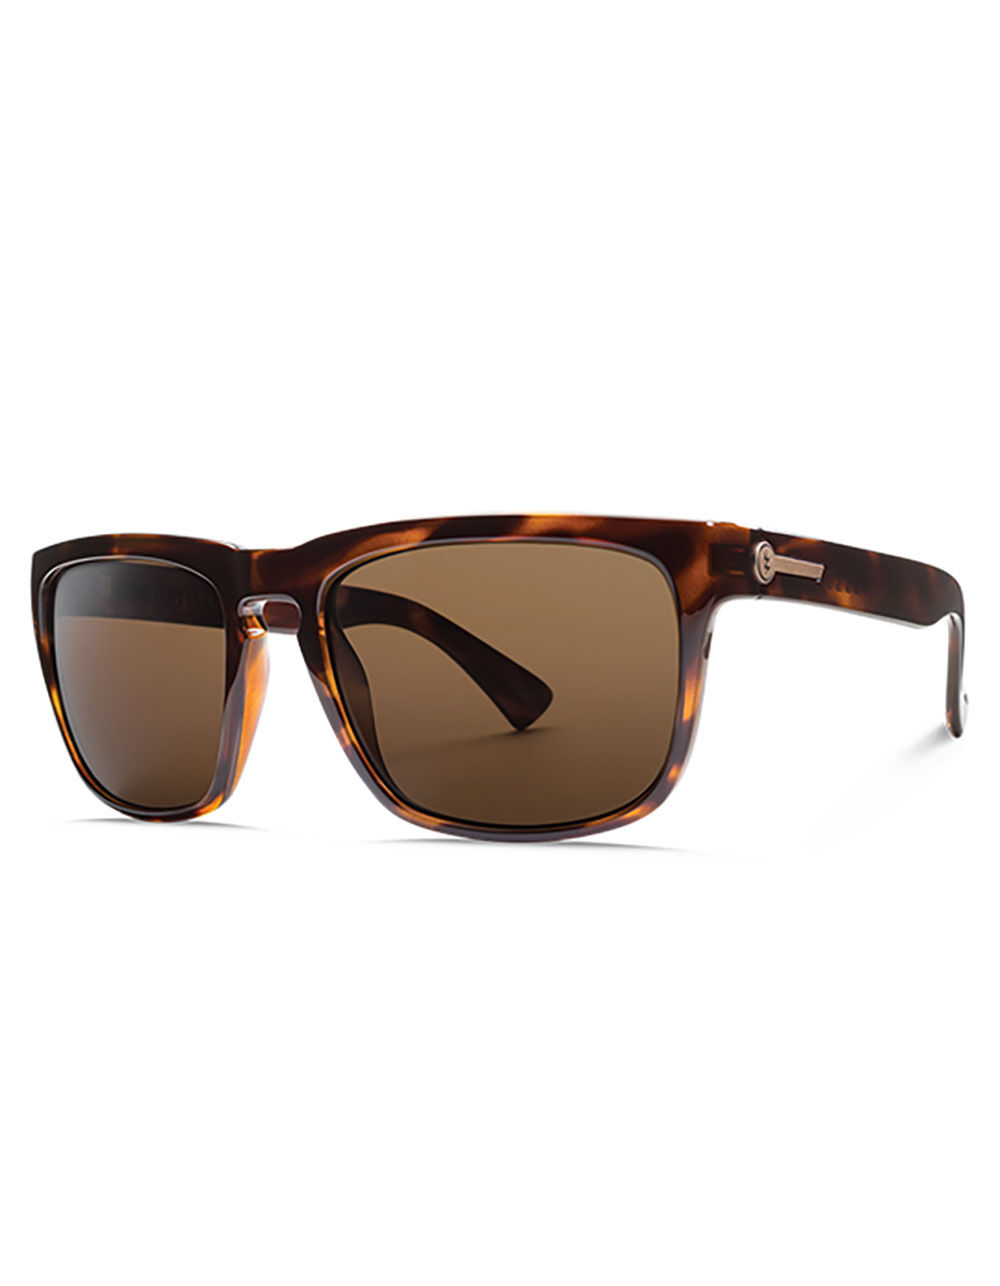 ELECTRIC KNOXVILLE POLARIZED SUNGLASSES